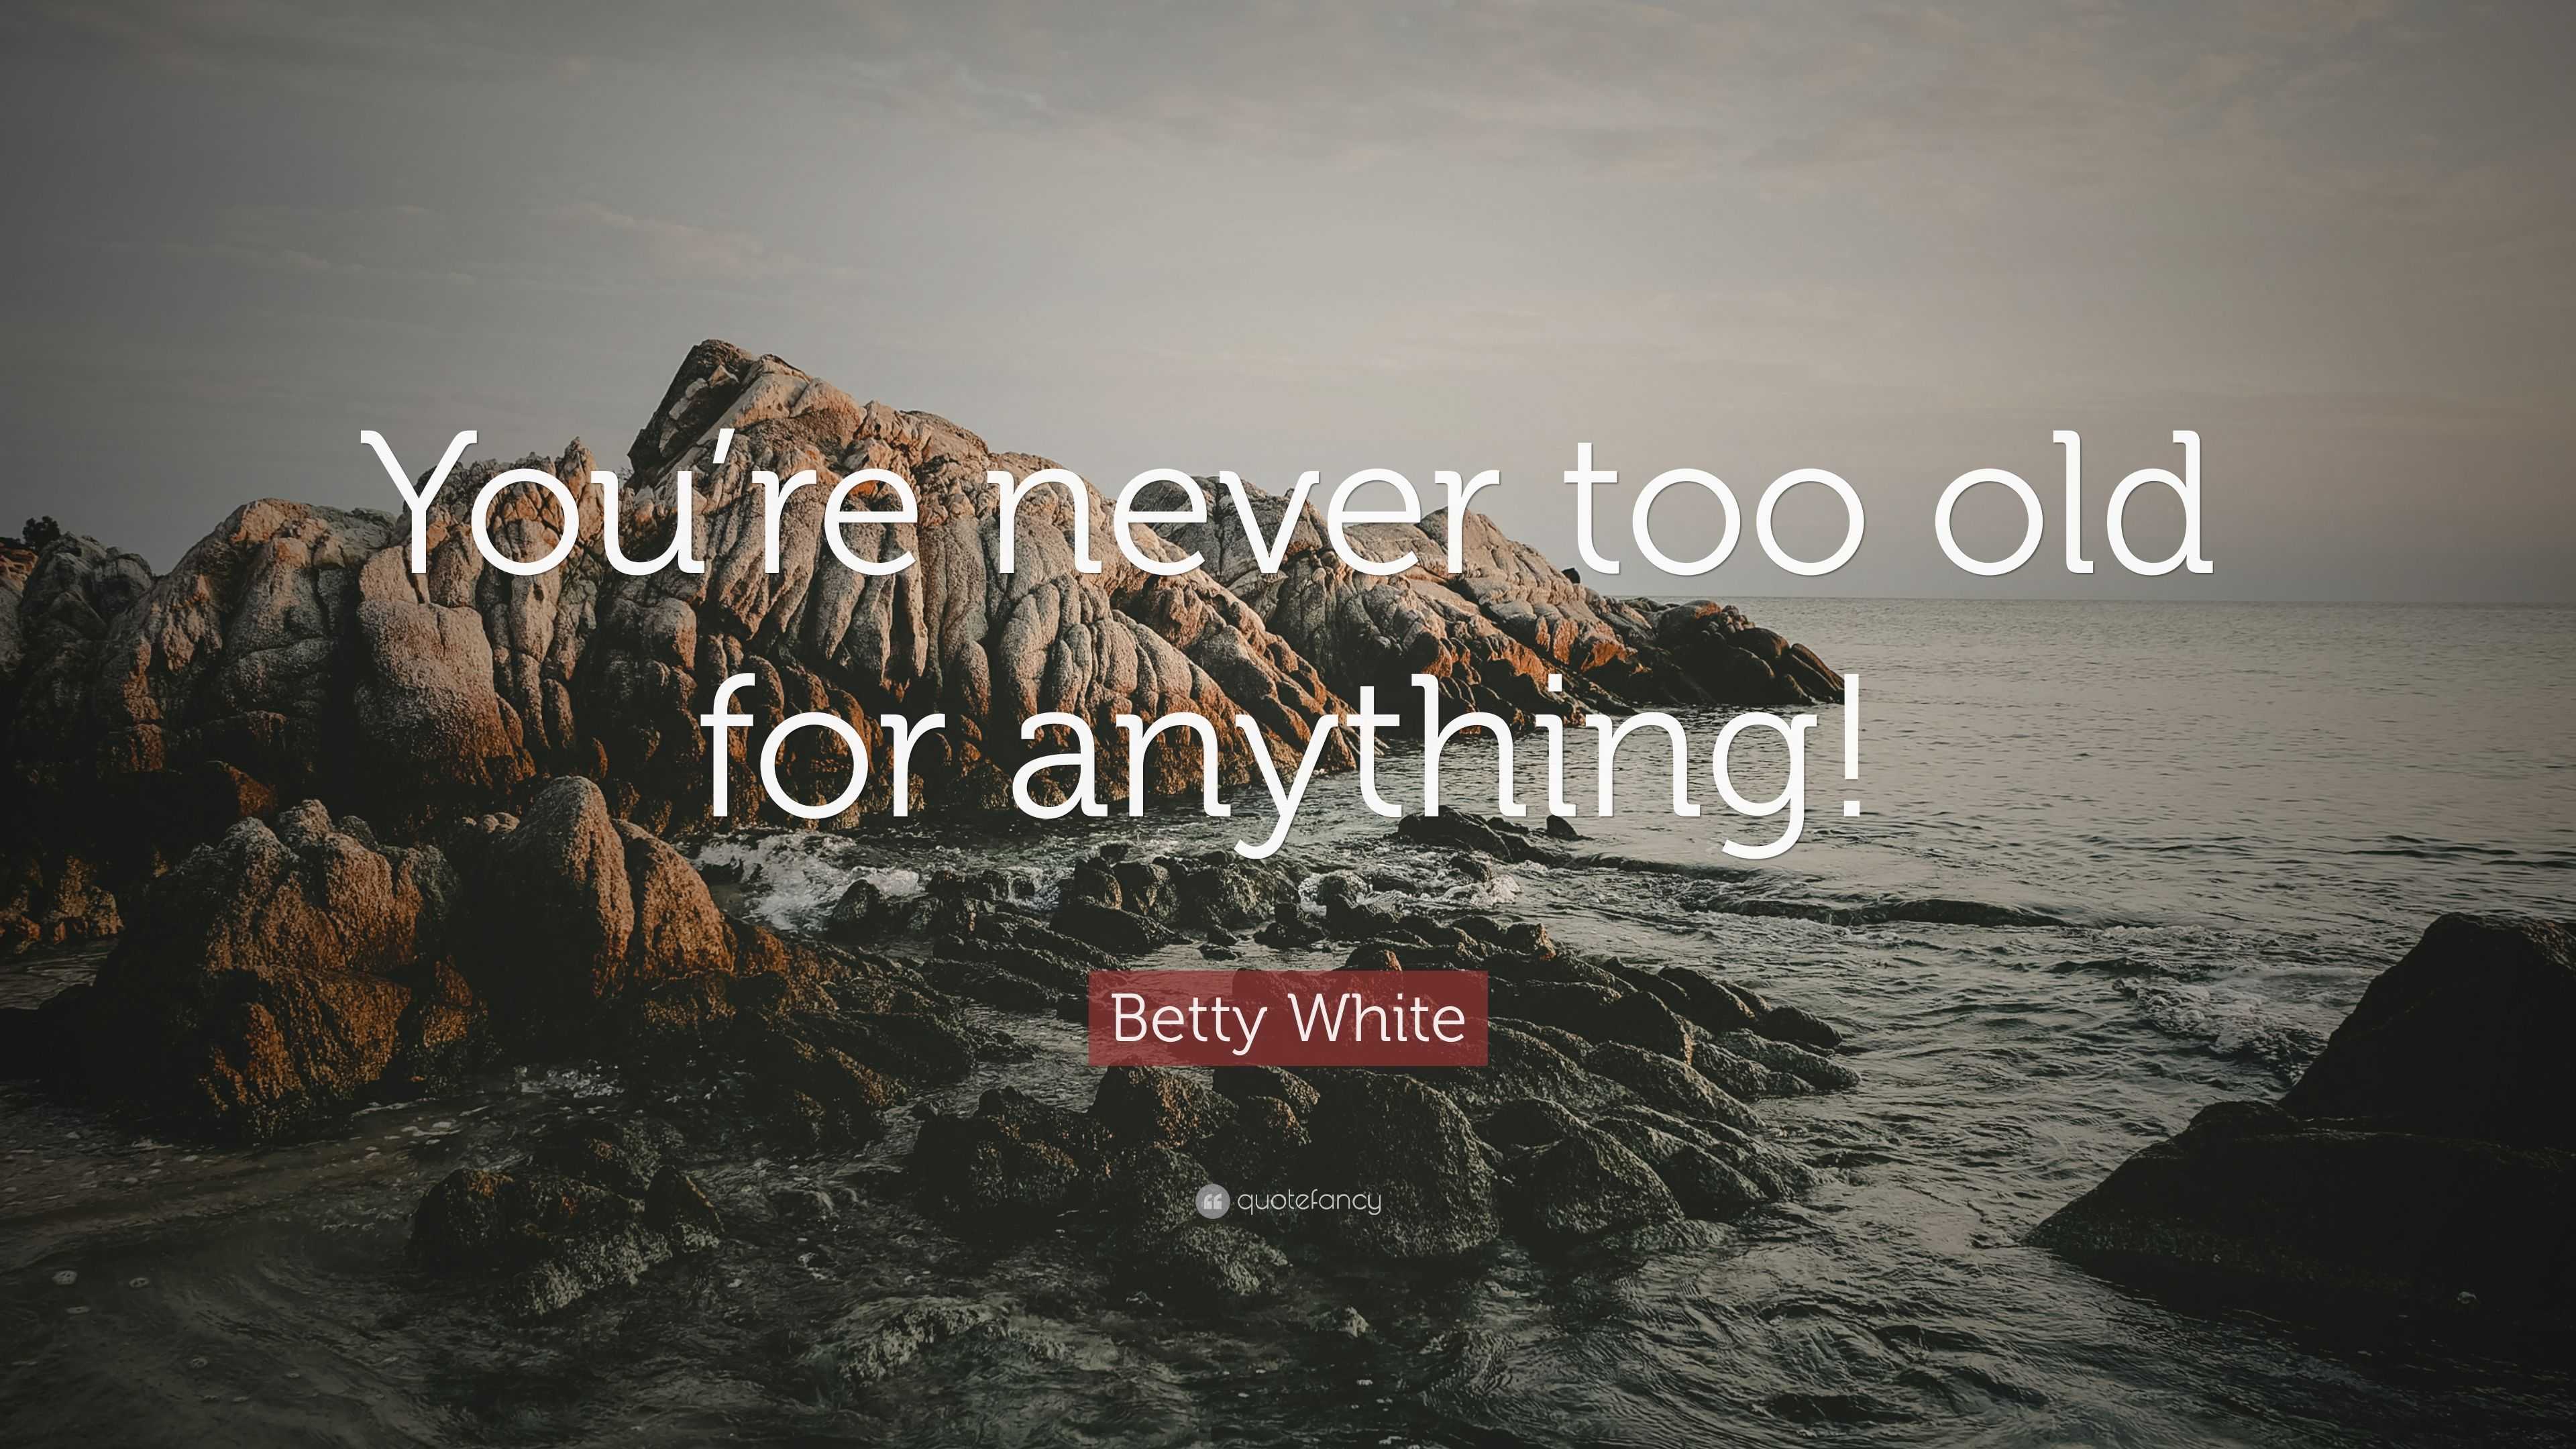 Betty White Quote “youre Never Too Old For Anything” 